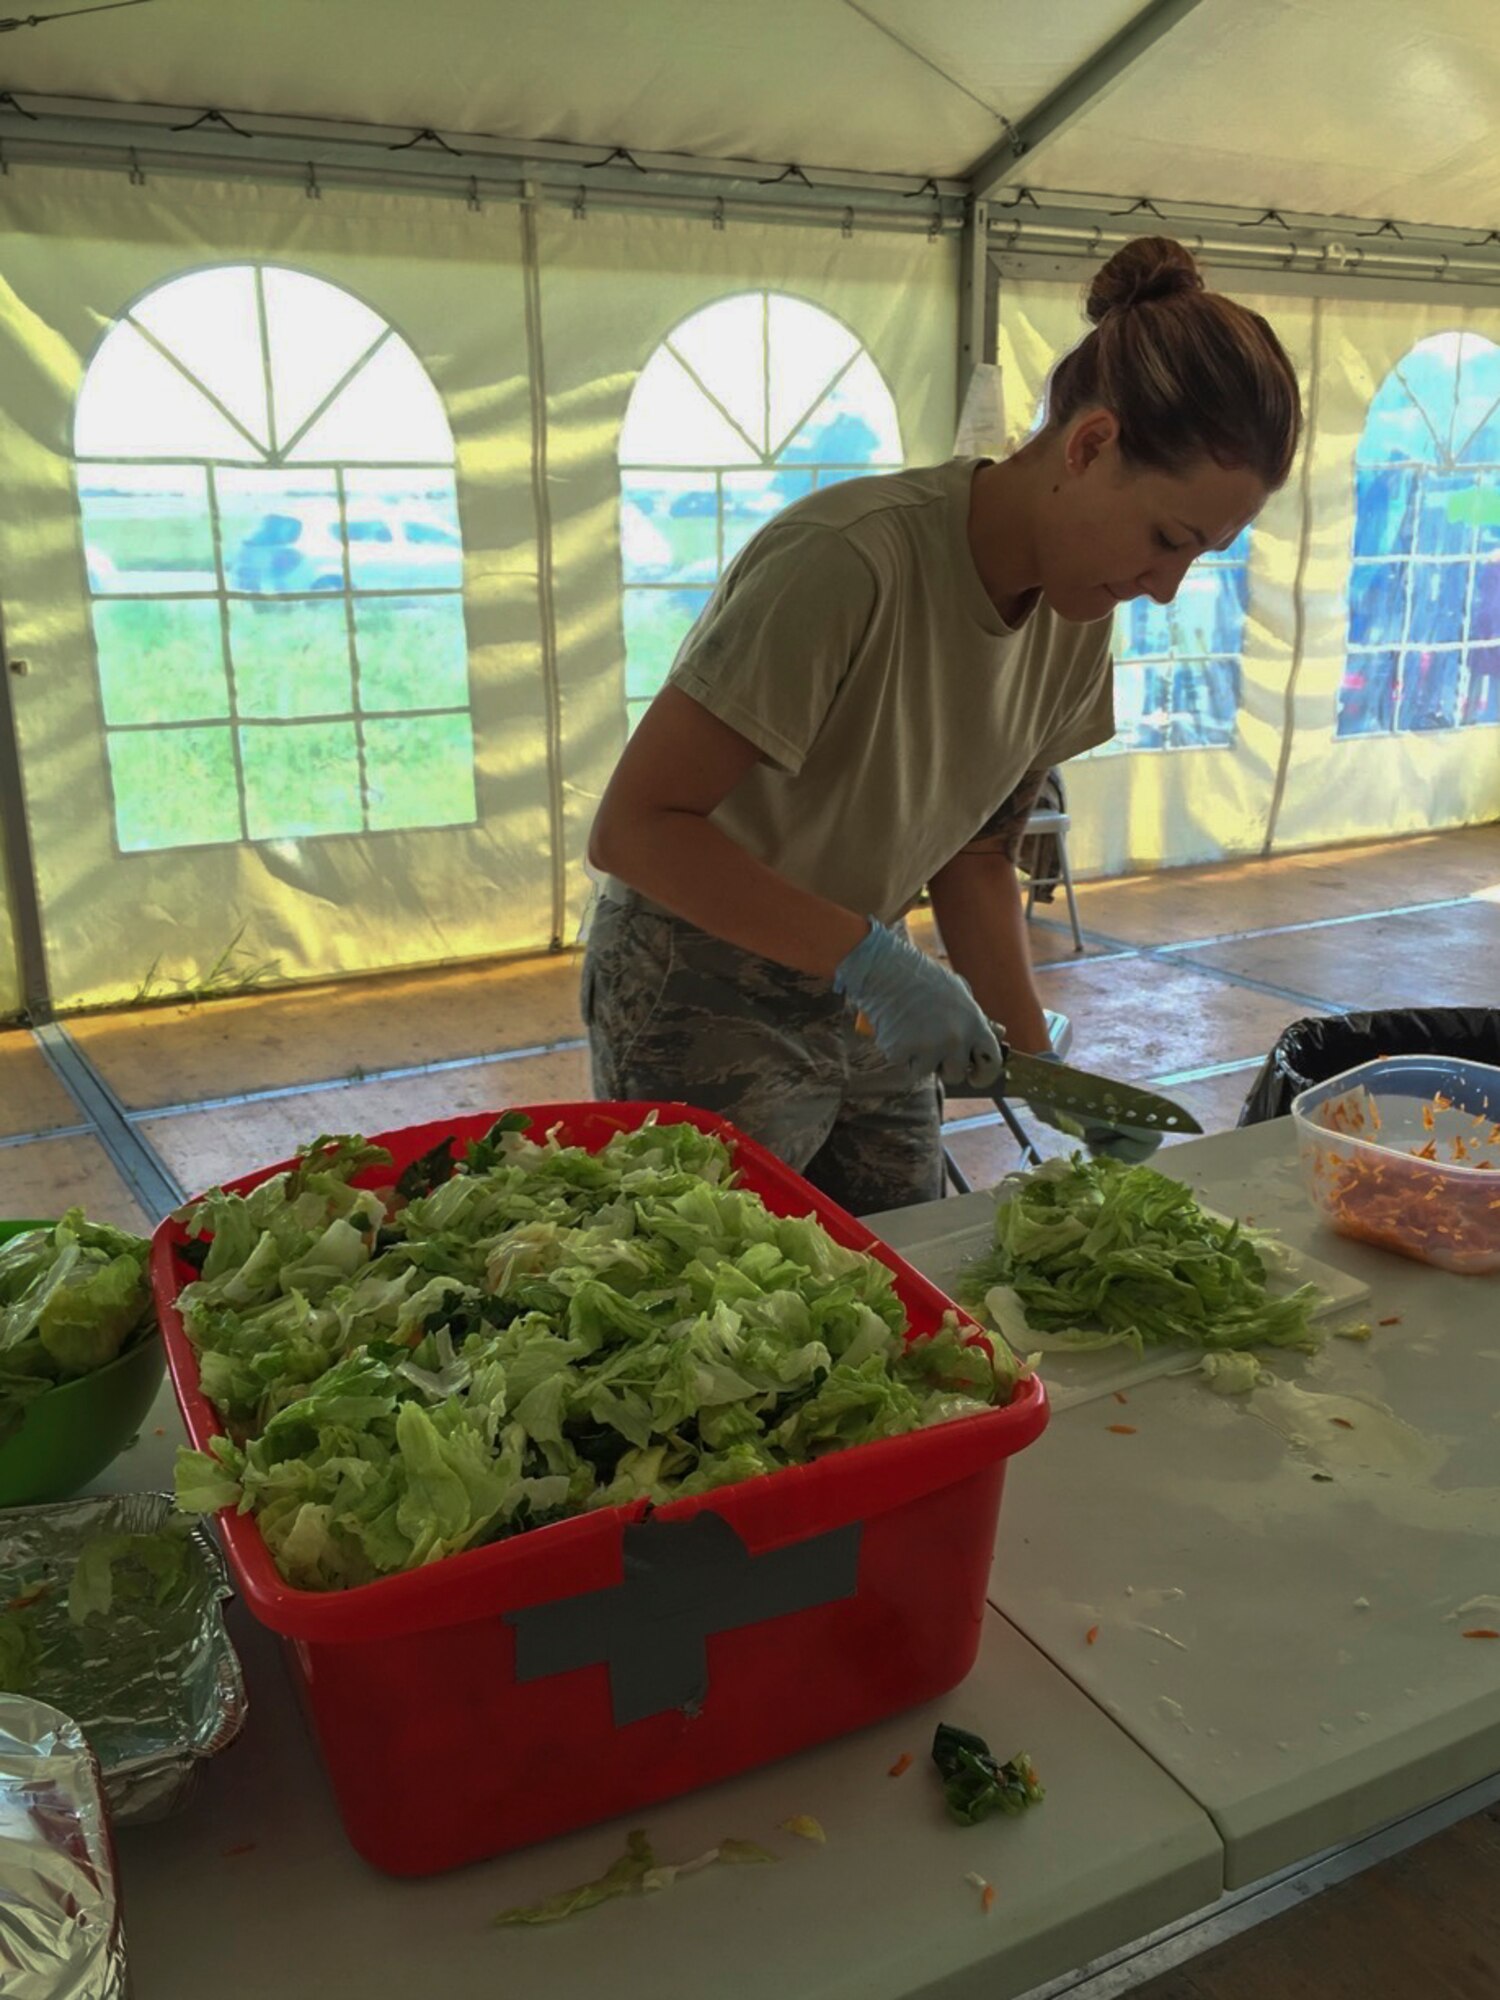 U.S. Air Force Staff Sgt. Krissa Fondakowski, a 104th Fighter Wing member, prepares food as an additional duty in the kitchen tent for Airmen at Graf Ignatievo, Bulgaria, June 3, 2016. Fondakowski is deployed with the 131st Expeditionary Fighter Squadron in support of Operation Atlantic Resolve. (Courtesy Photo by Master Sgt. Adam Casineau/Released)
